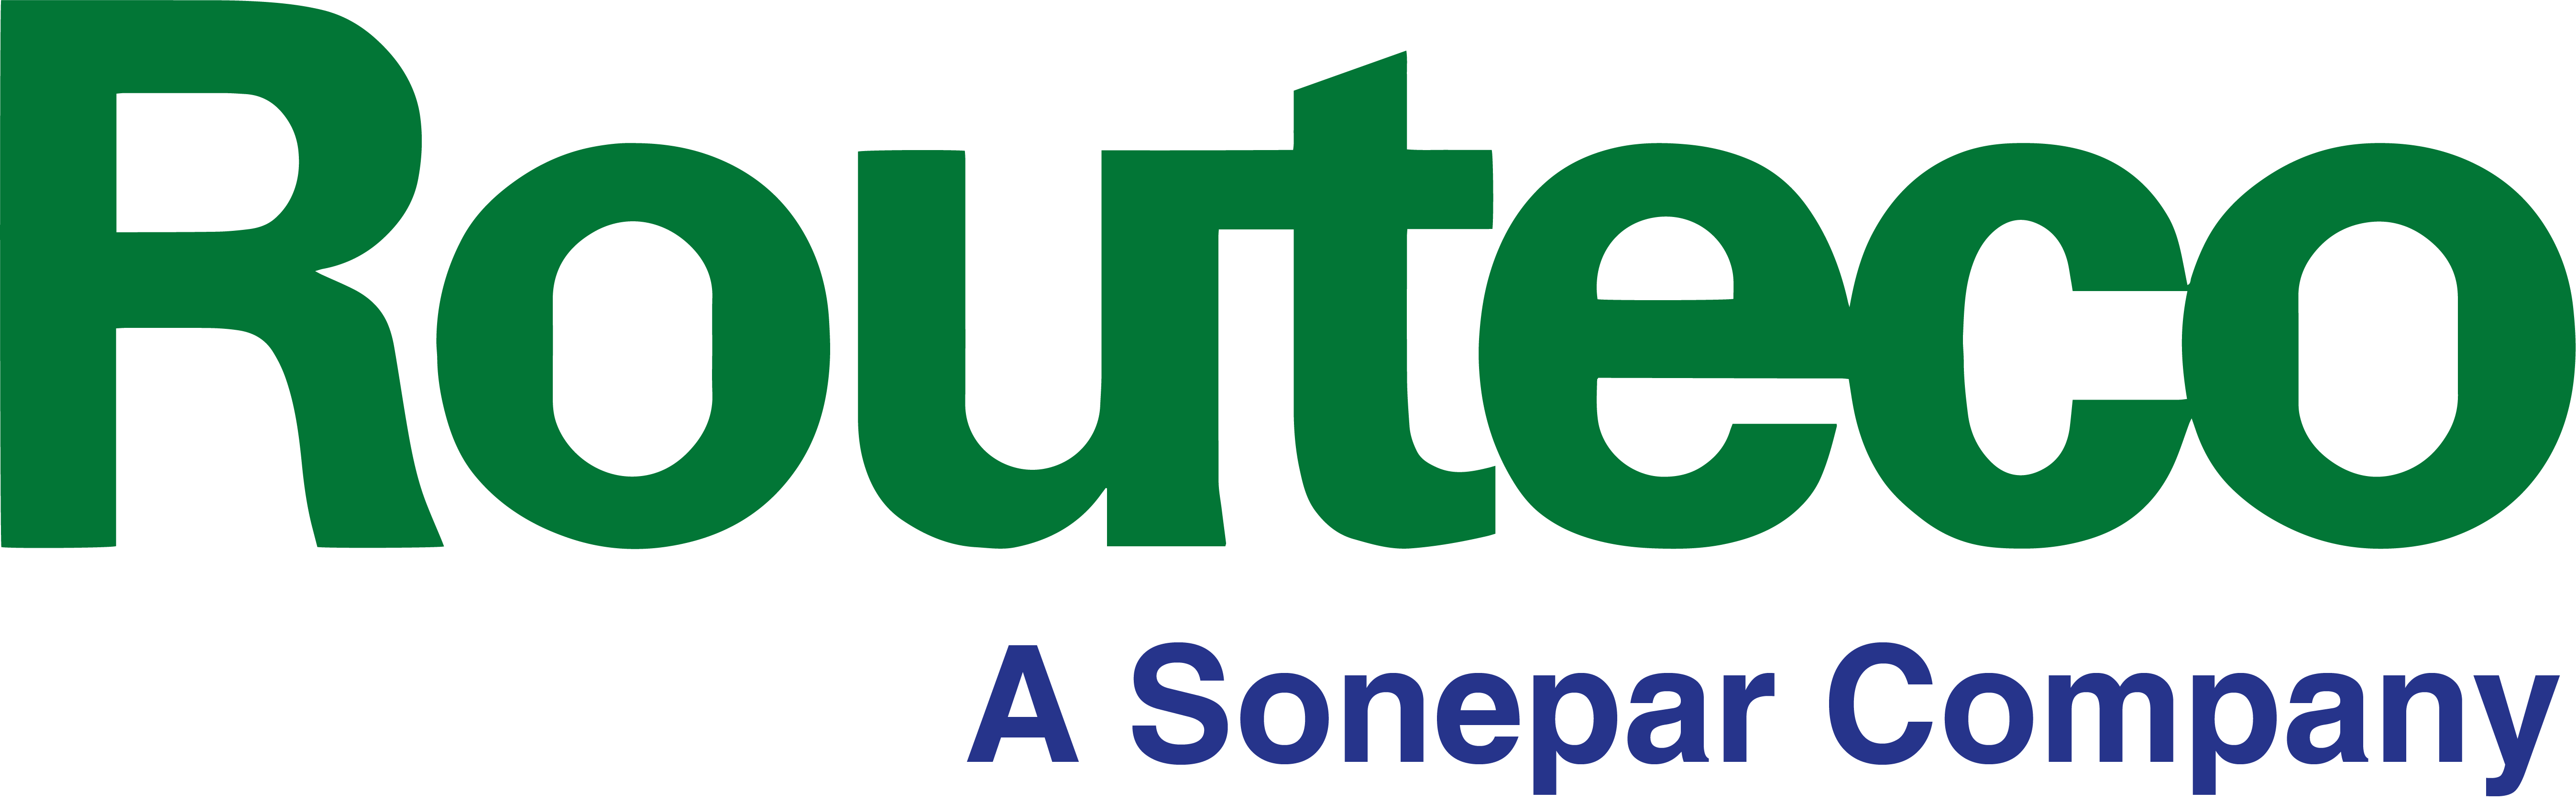 Routeco Limited